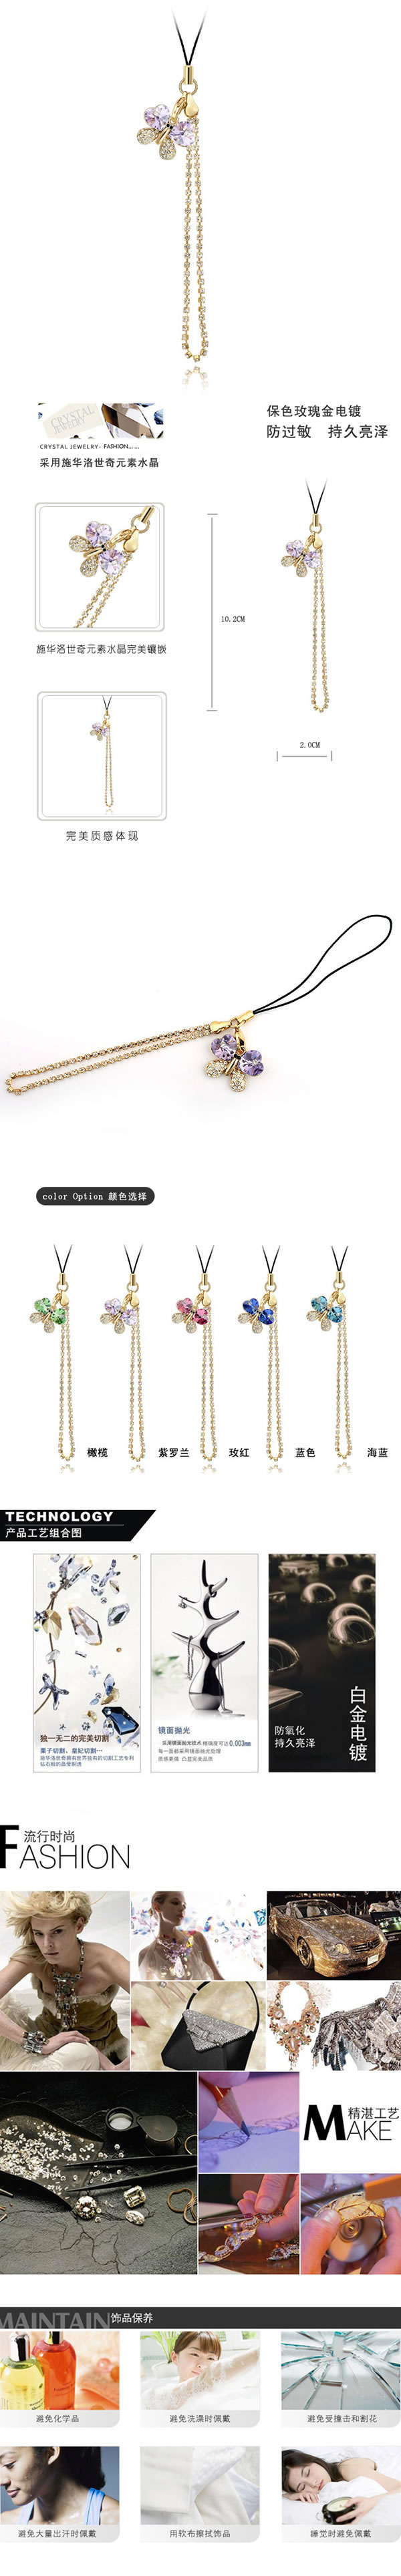 Native Purple Butterfly Design Alloy Mobile phone products,Anti-Dust Plug